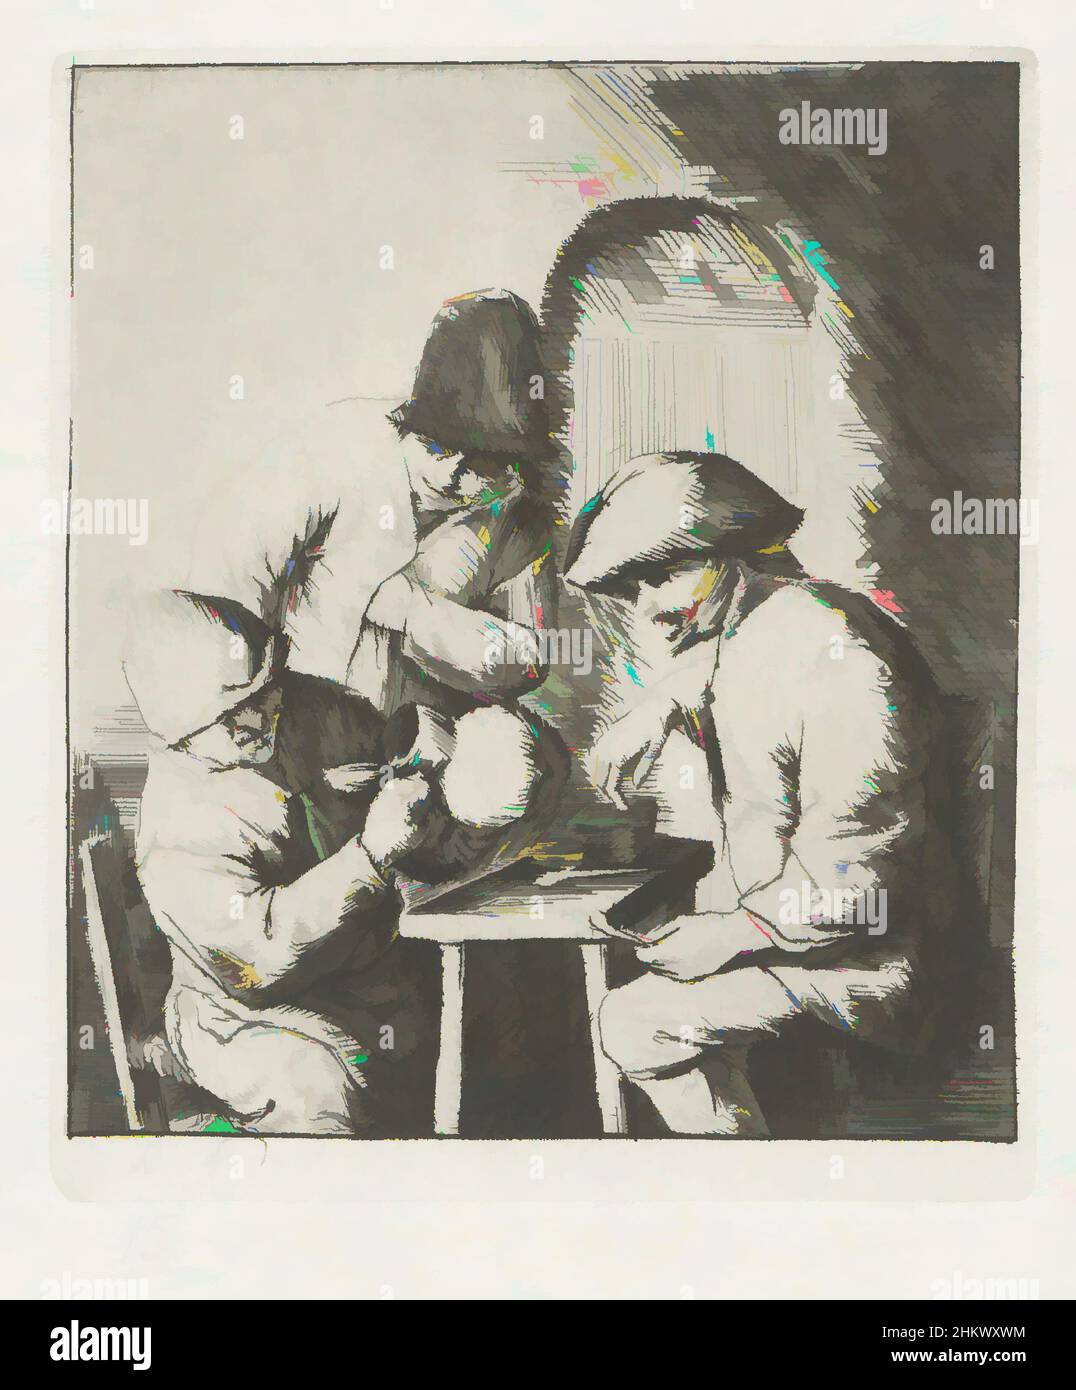 Art inspired by Man looking into empty jar, two men looking on, Some of the gestures of the men in this scene carry a negative meaning. The man looking into the empty jug is a kannekijker or a drunkard. The gesture of the man standing behind him, with his hand hidden behind his shirt, Classic works modernized by Artotop with a splash of modernity. Shapes, color and value, eye-catching visual impact on art. Emotions through freedom of artworks in a contemporary way. A timeless message pursuing a wildly creative new direction. Artists turning to the digital medium and creating the Artotop NFT Stock Photo